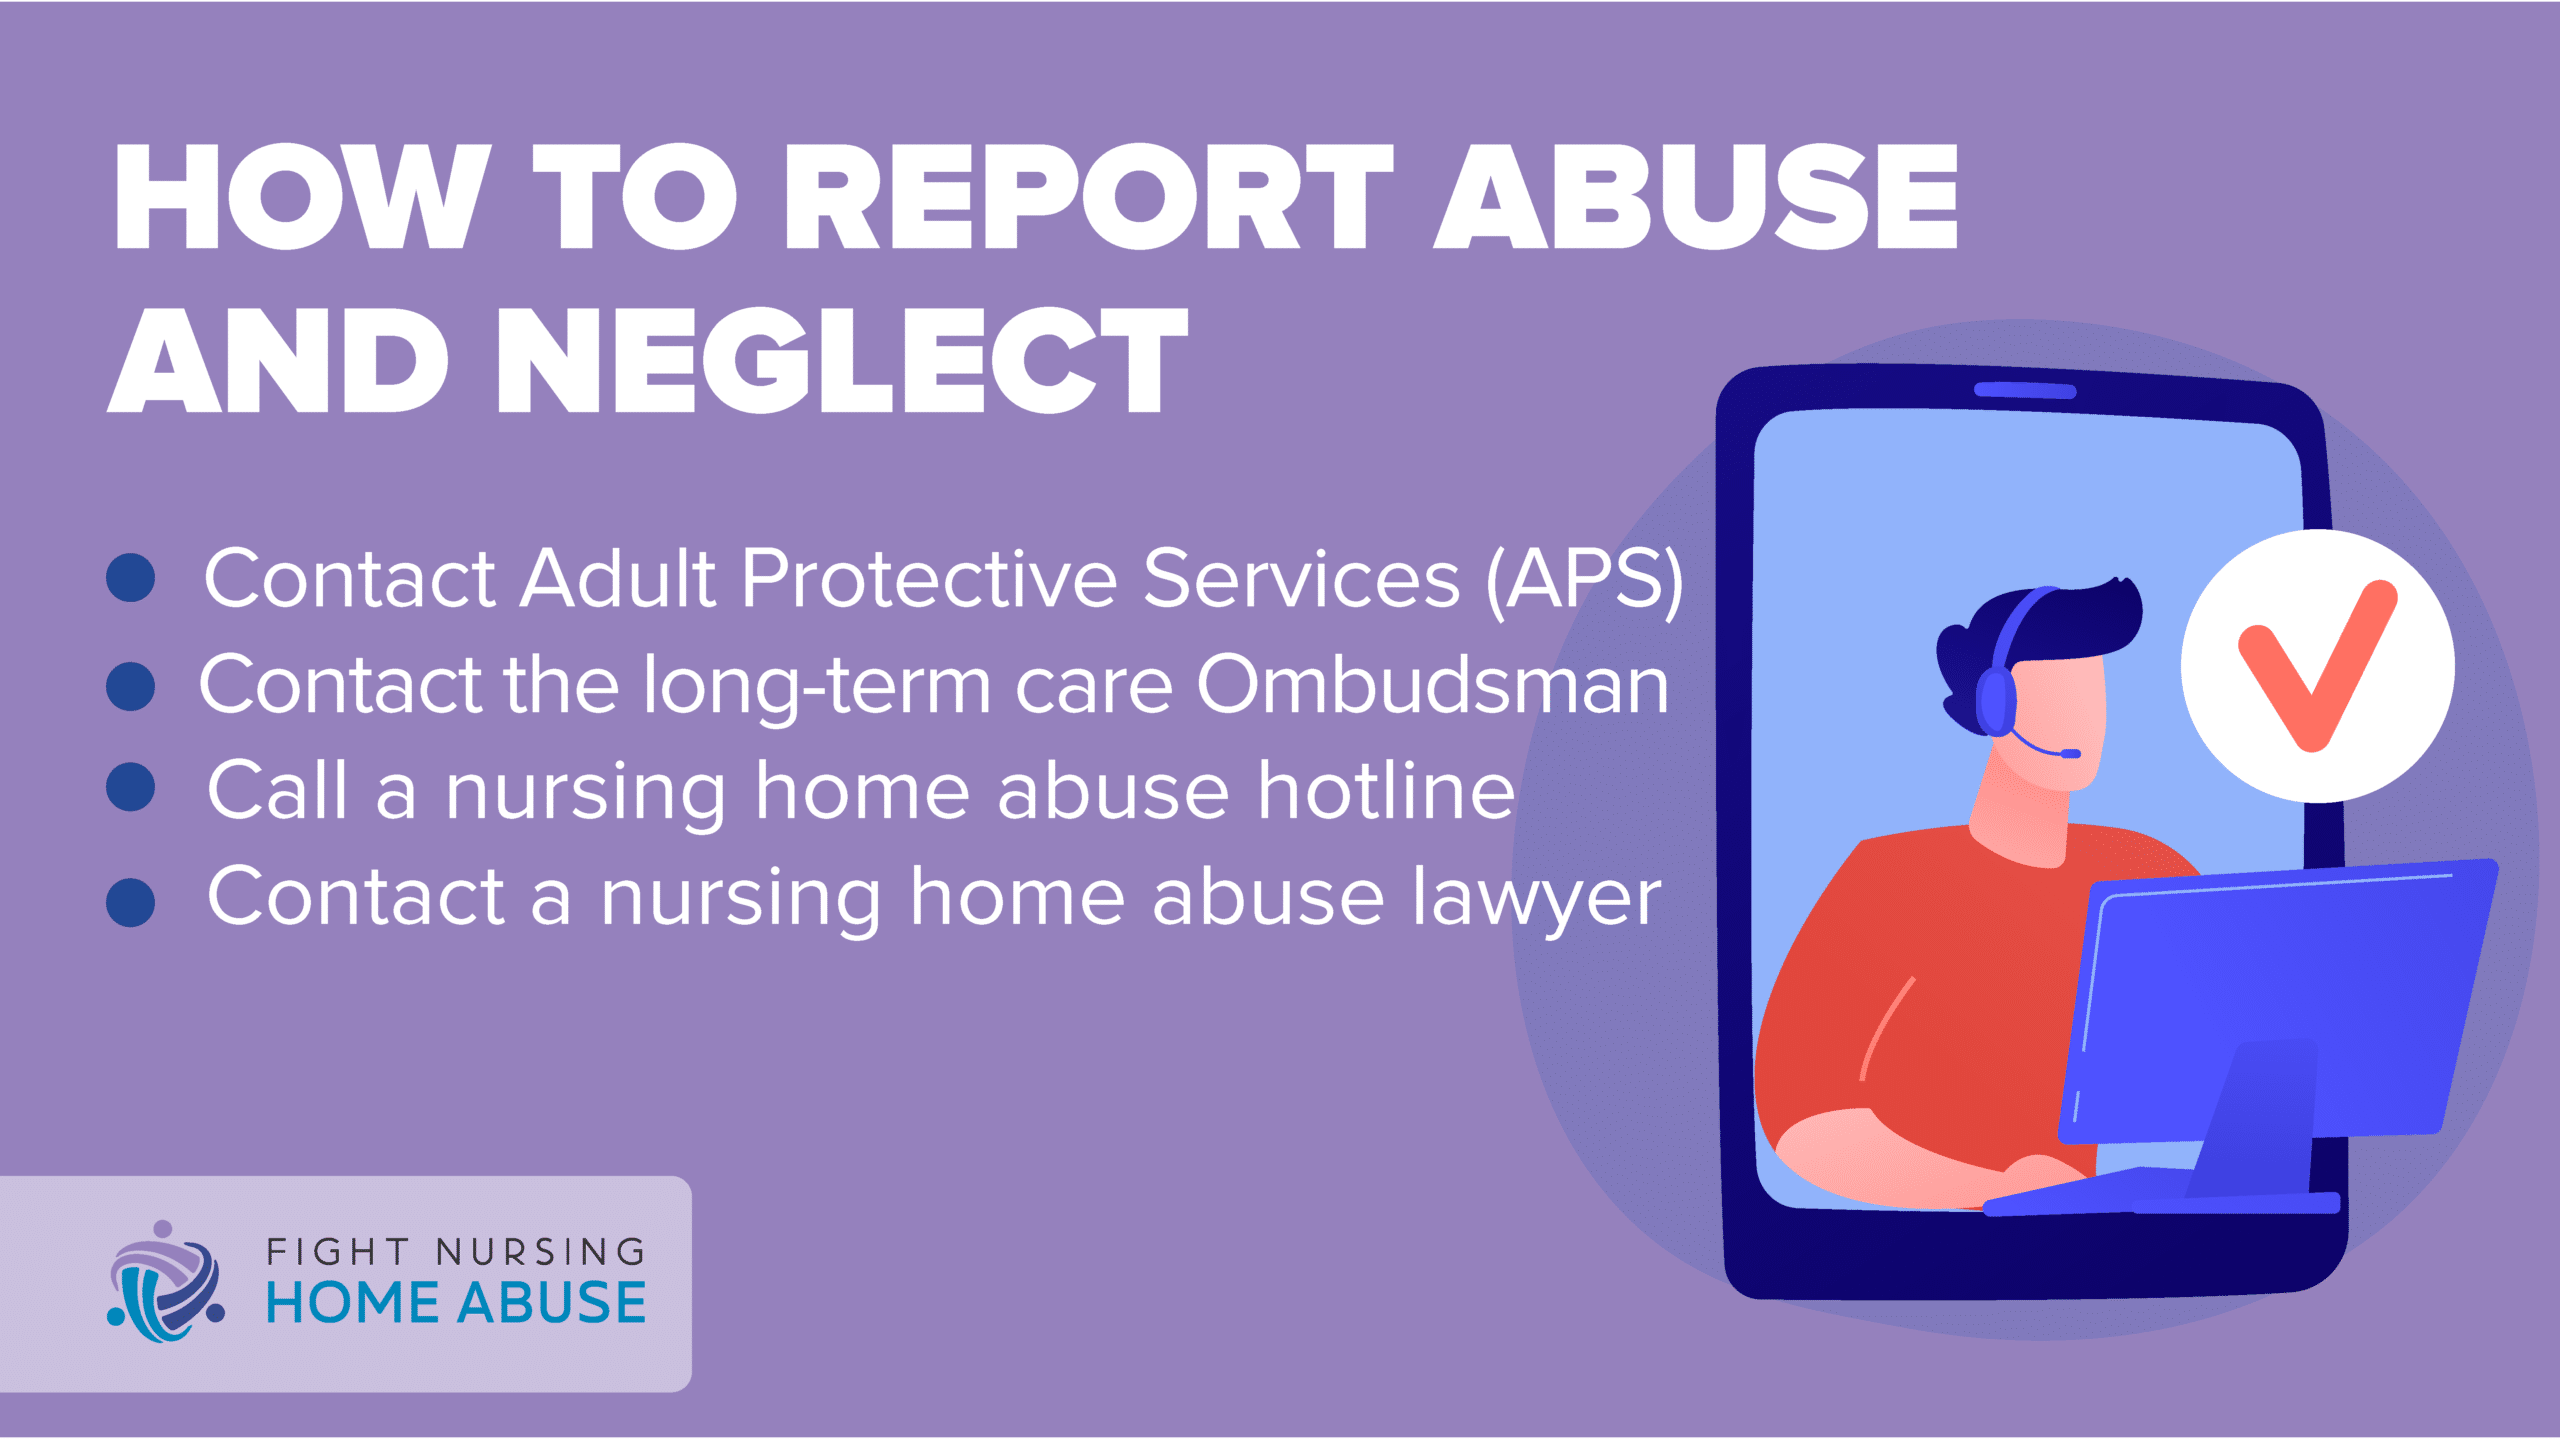 How to Report Abuse and Neglect